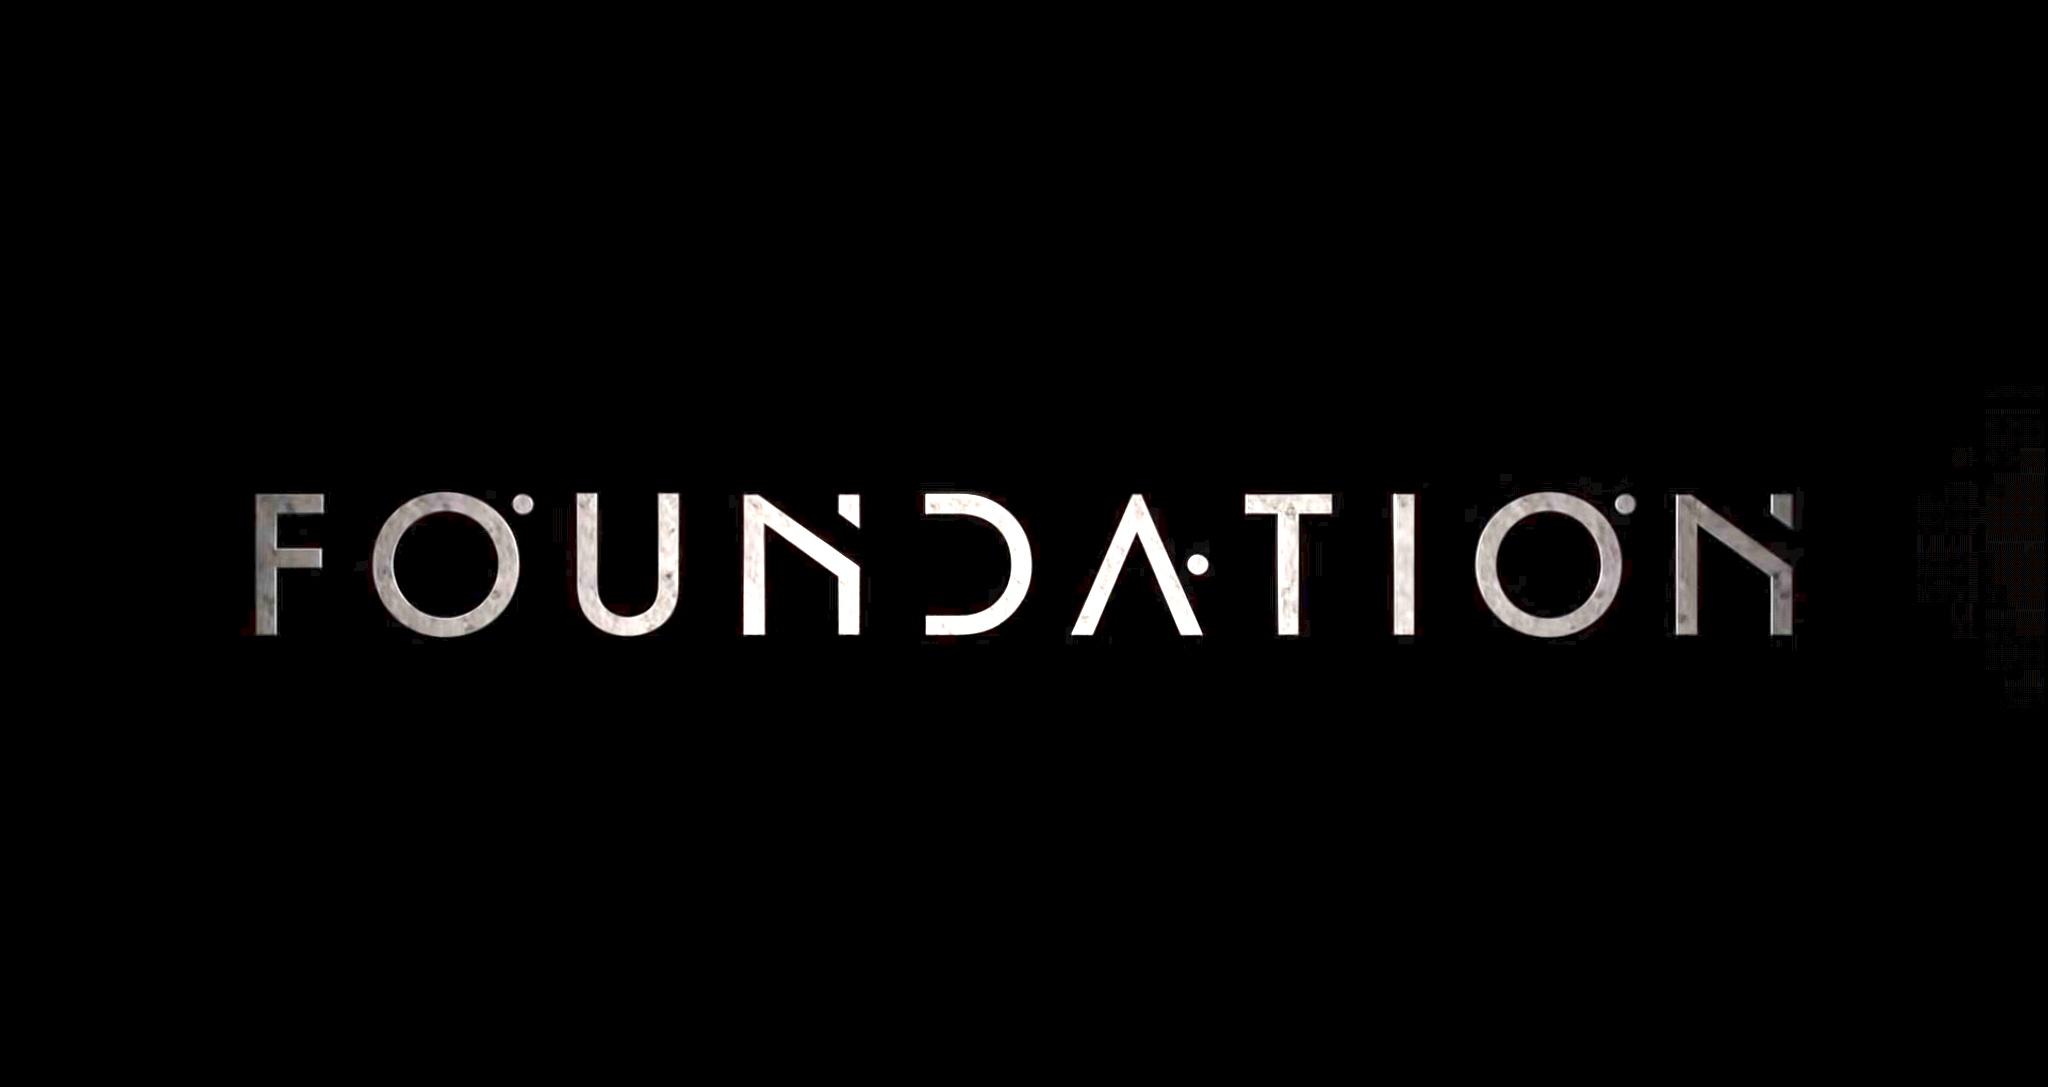 Foundation (2021) starring Lee Pace, Lou Llobell